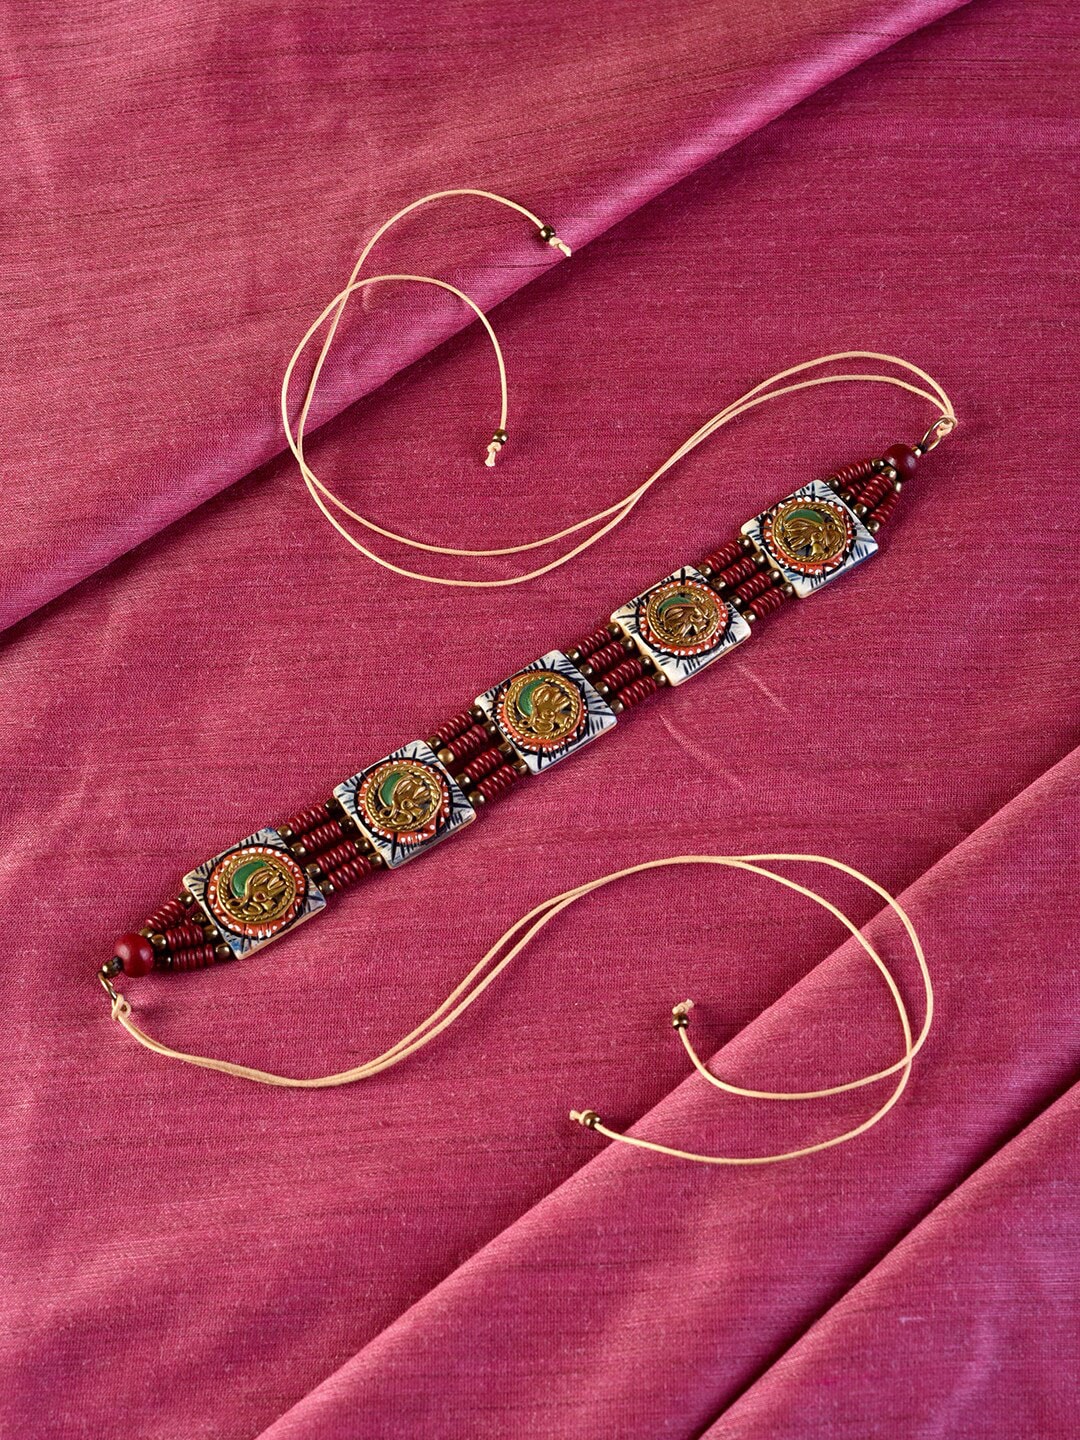 AAKRITI ART CREATIONS Maroon & Gold-Toned Tribal Dhokra Square Choker Necklace Price in India